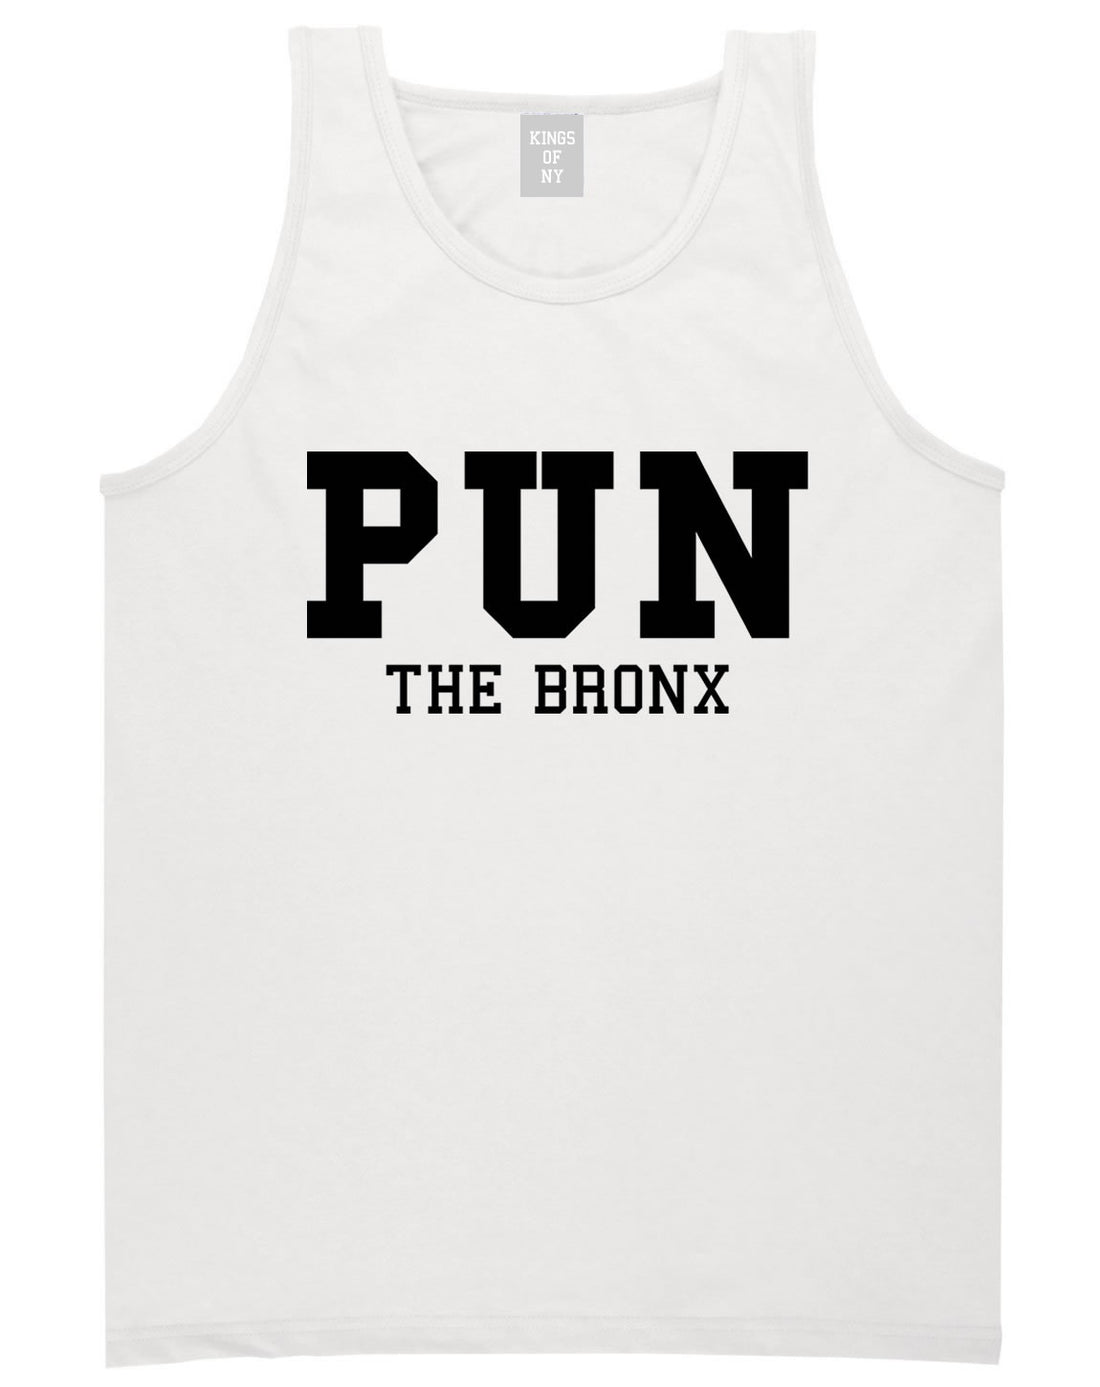 Pun The Bronx Tank Top in White by Kings Of NY